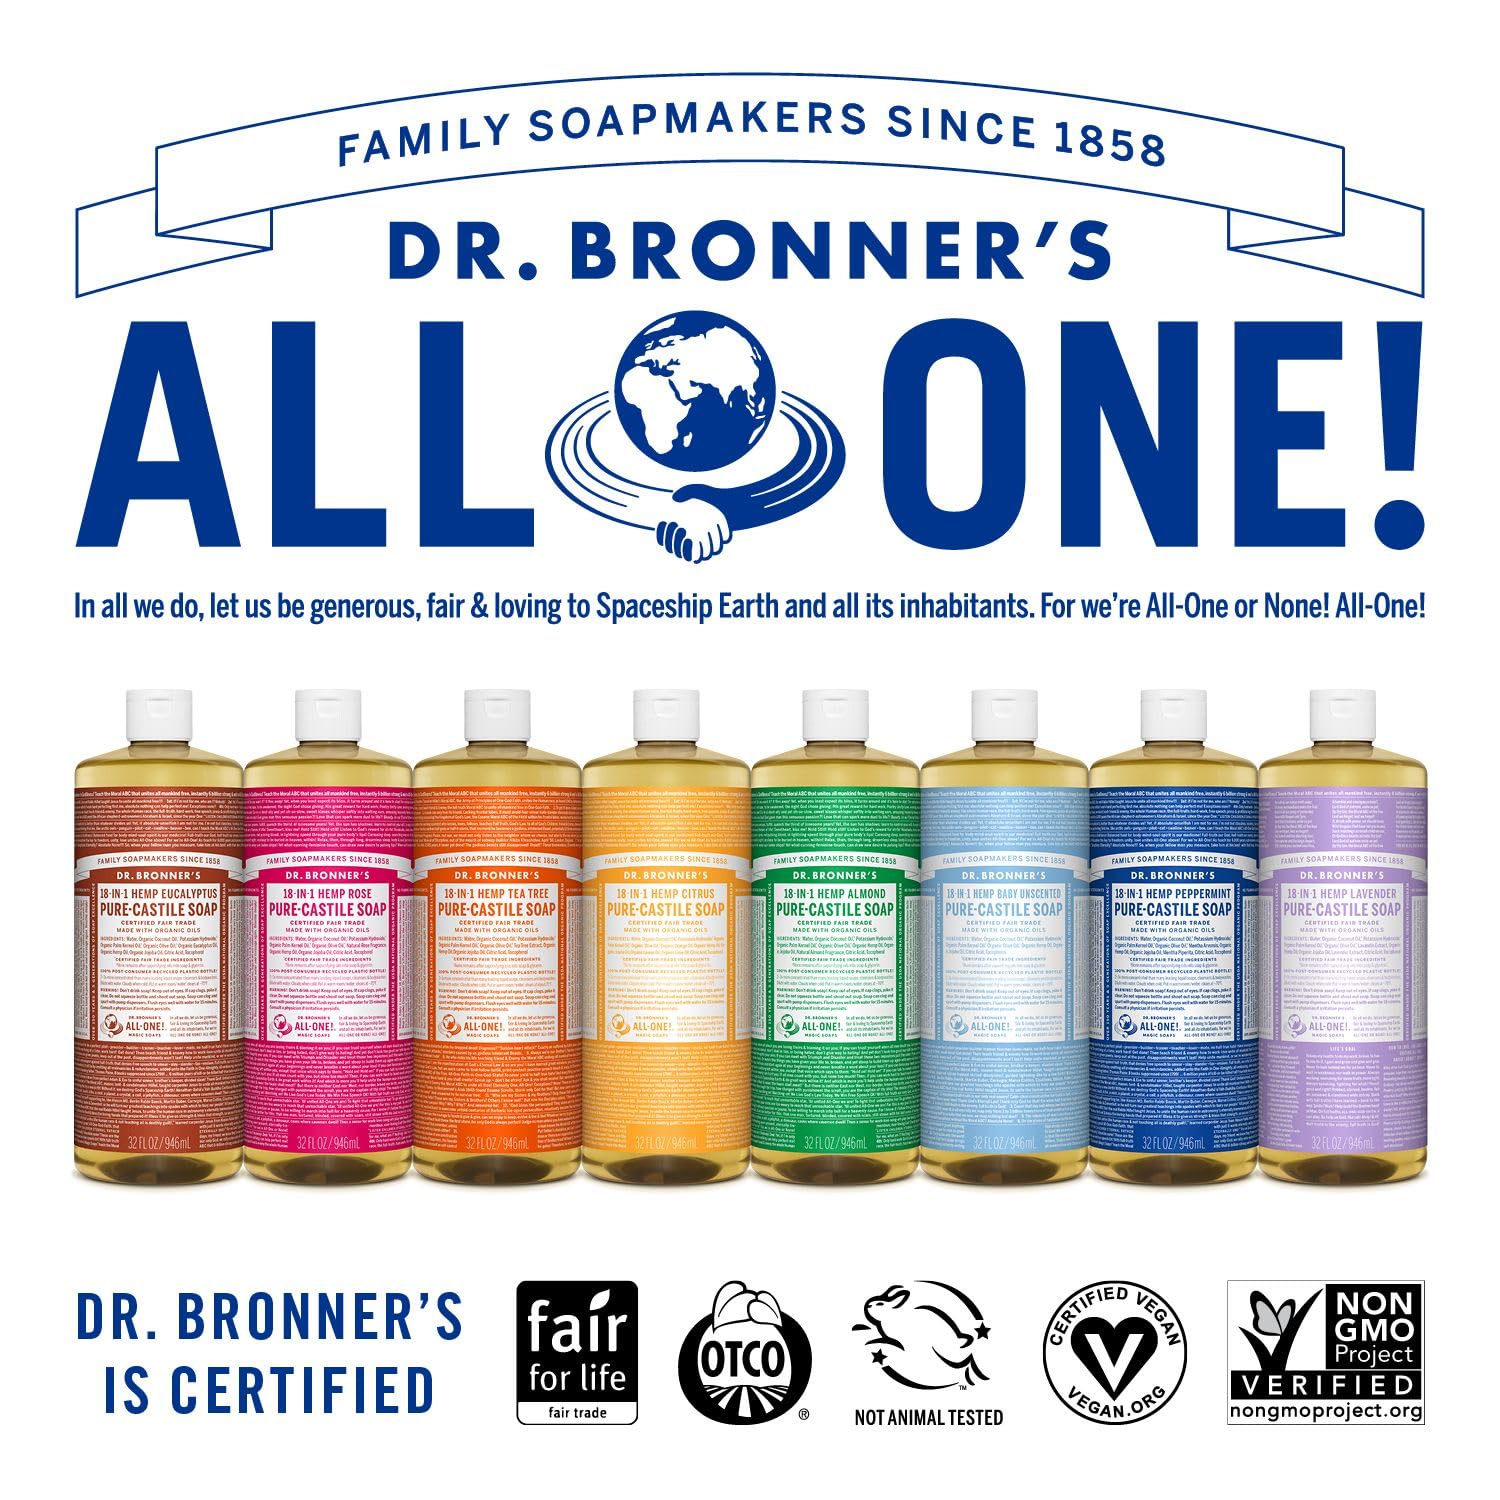 Dr. Bronner’s - Pure-Castile Liquid Soap (Peppermint, 32 ounce) - Made with Organic Oils, 18-in-1 Uses: Face, Body, Hair, Laundry, Pets and Dishes, Concentrated, Vegan, Non-GMO : Camping Soaps And Shampoos : Beauty & Personal Care